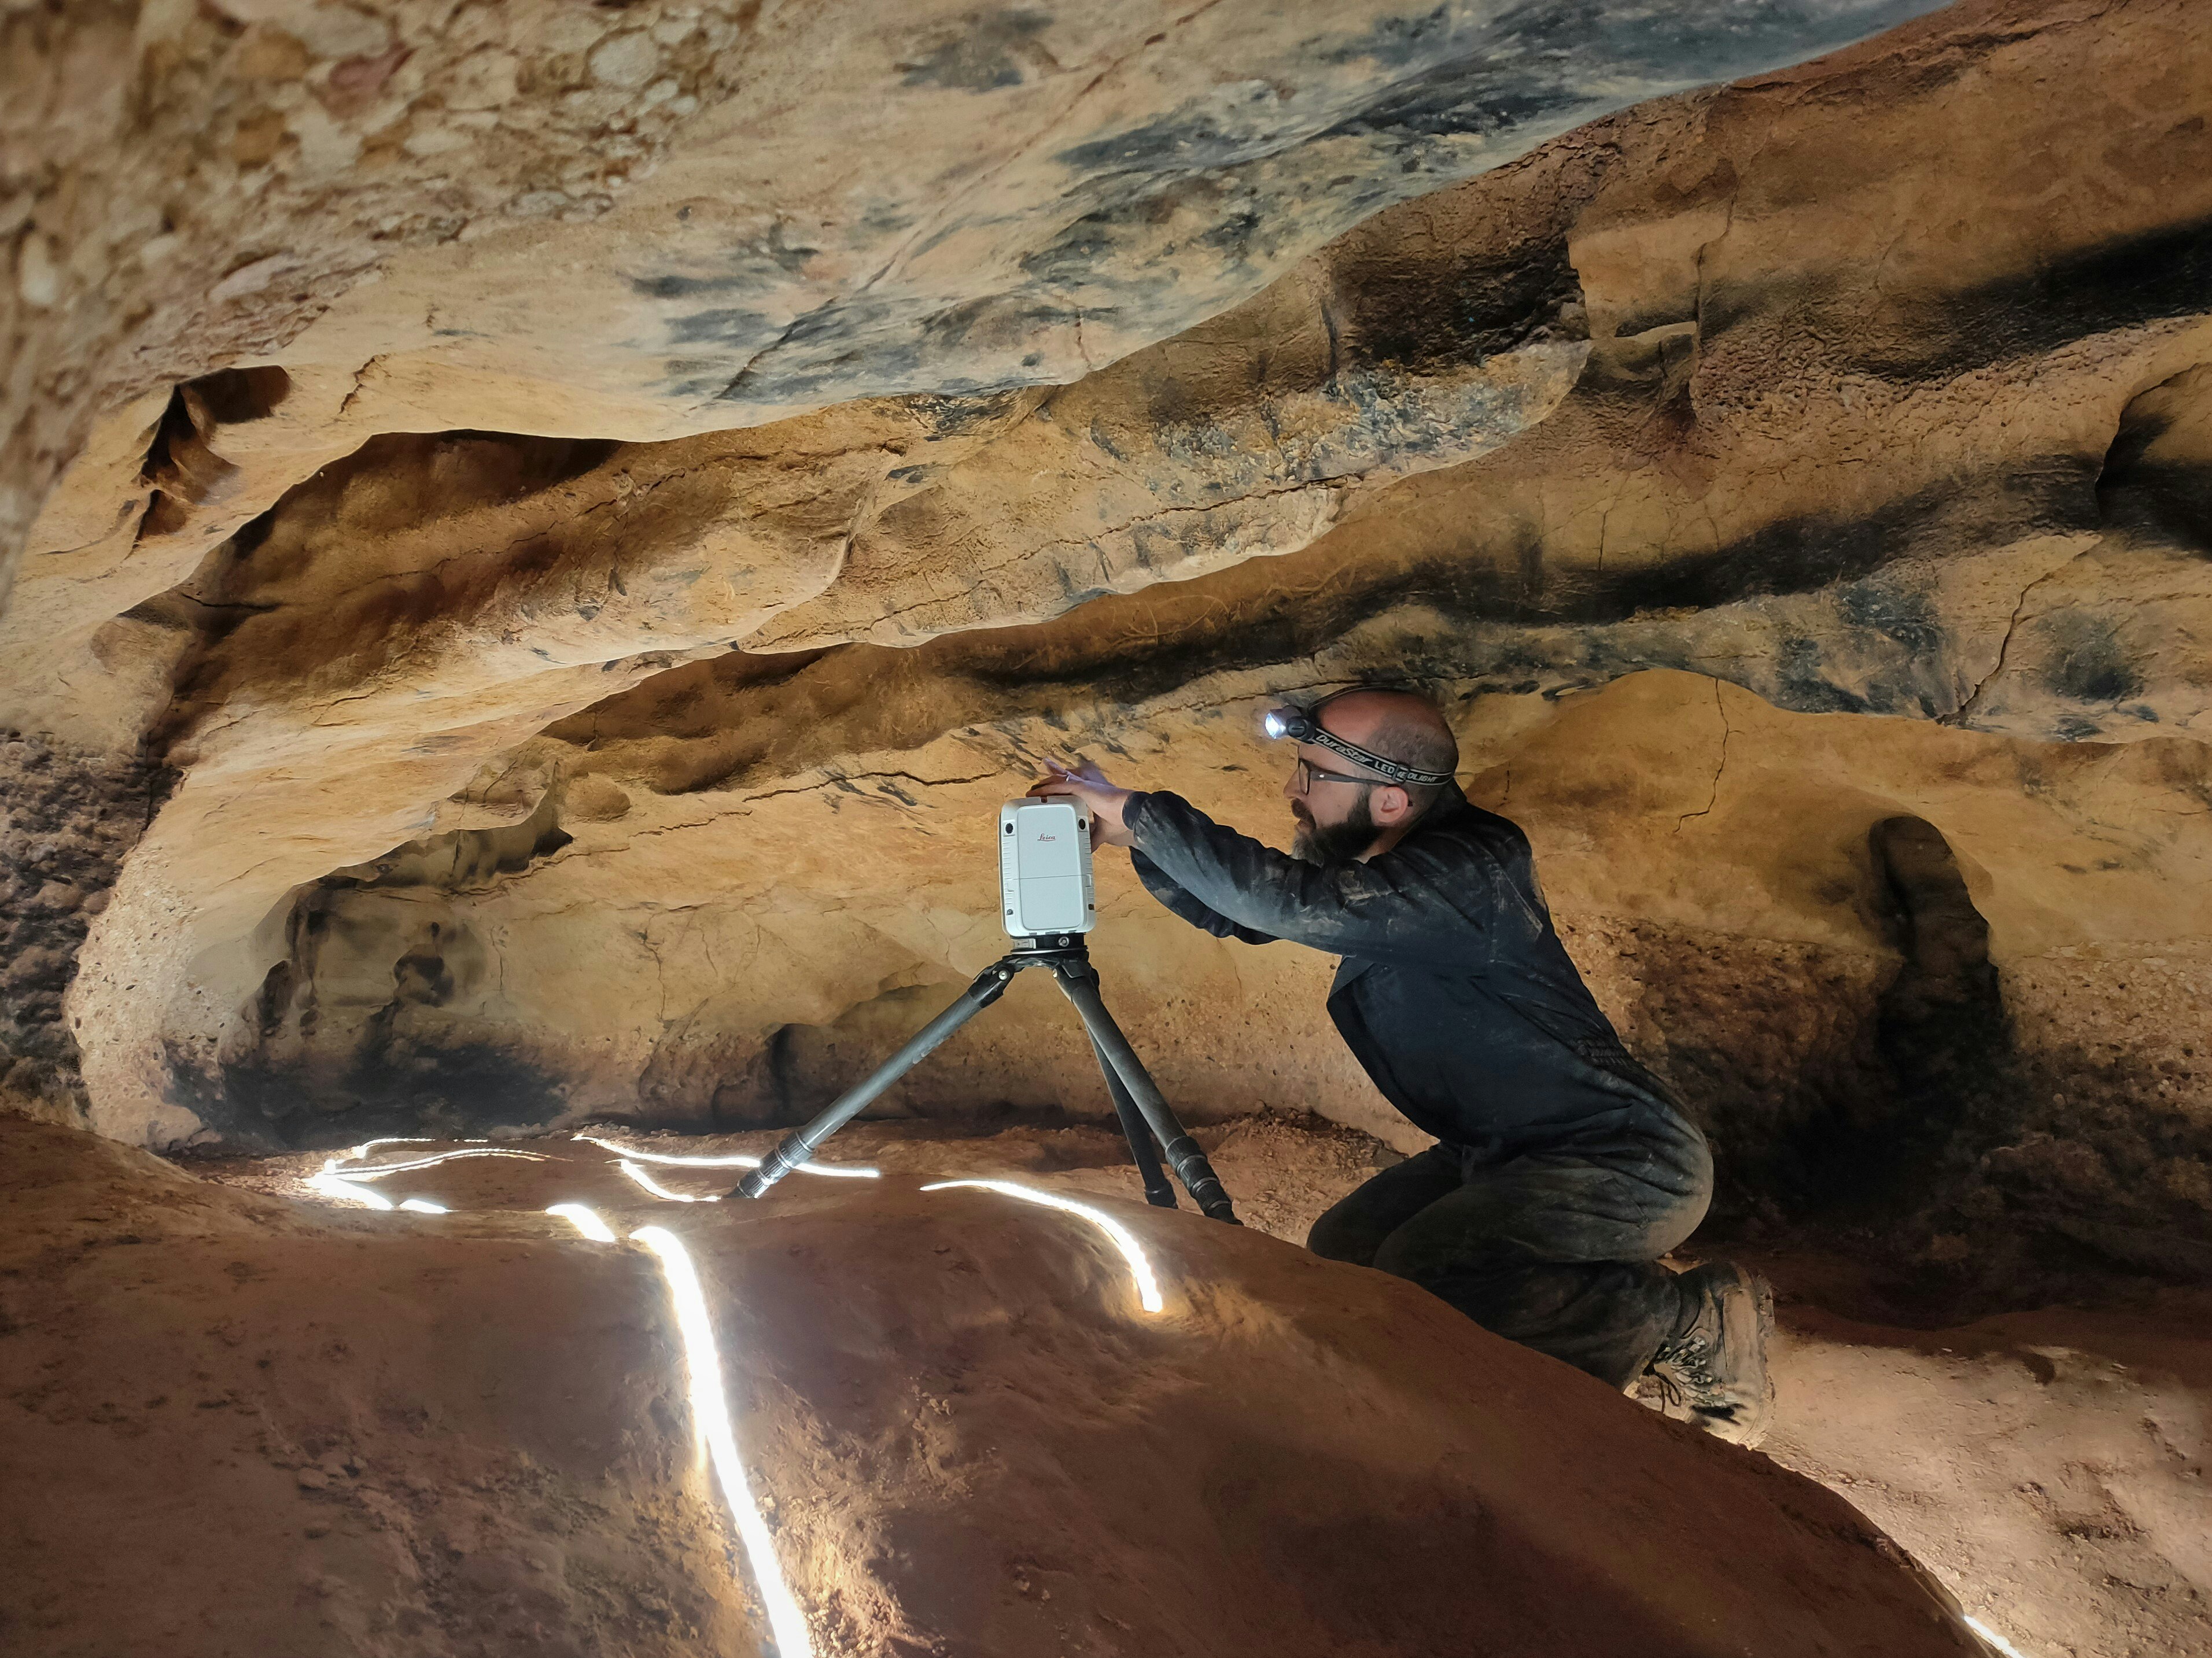 An archaeologist wearing a hard hat examines ancient cave art